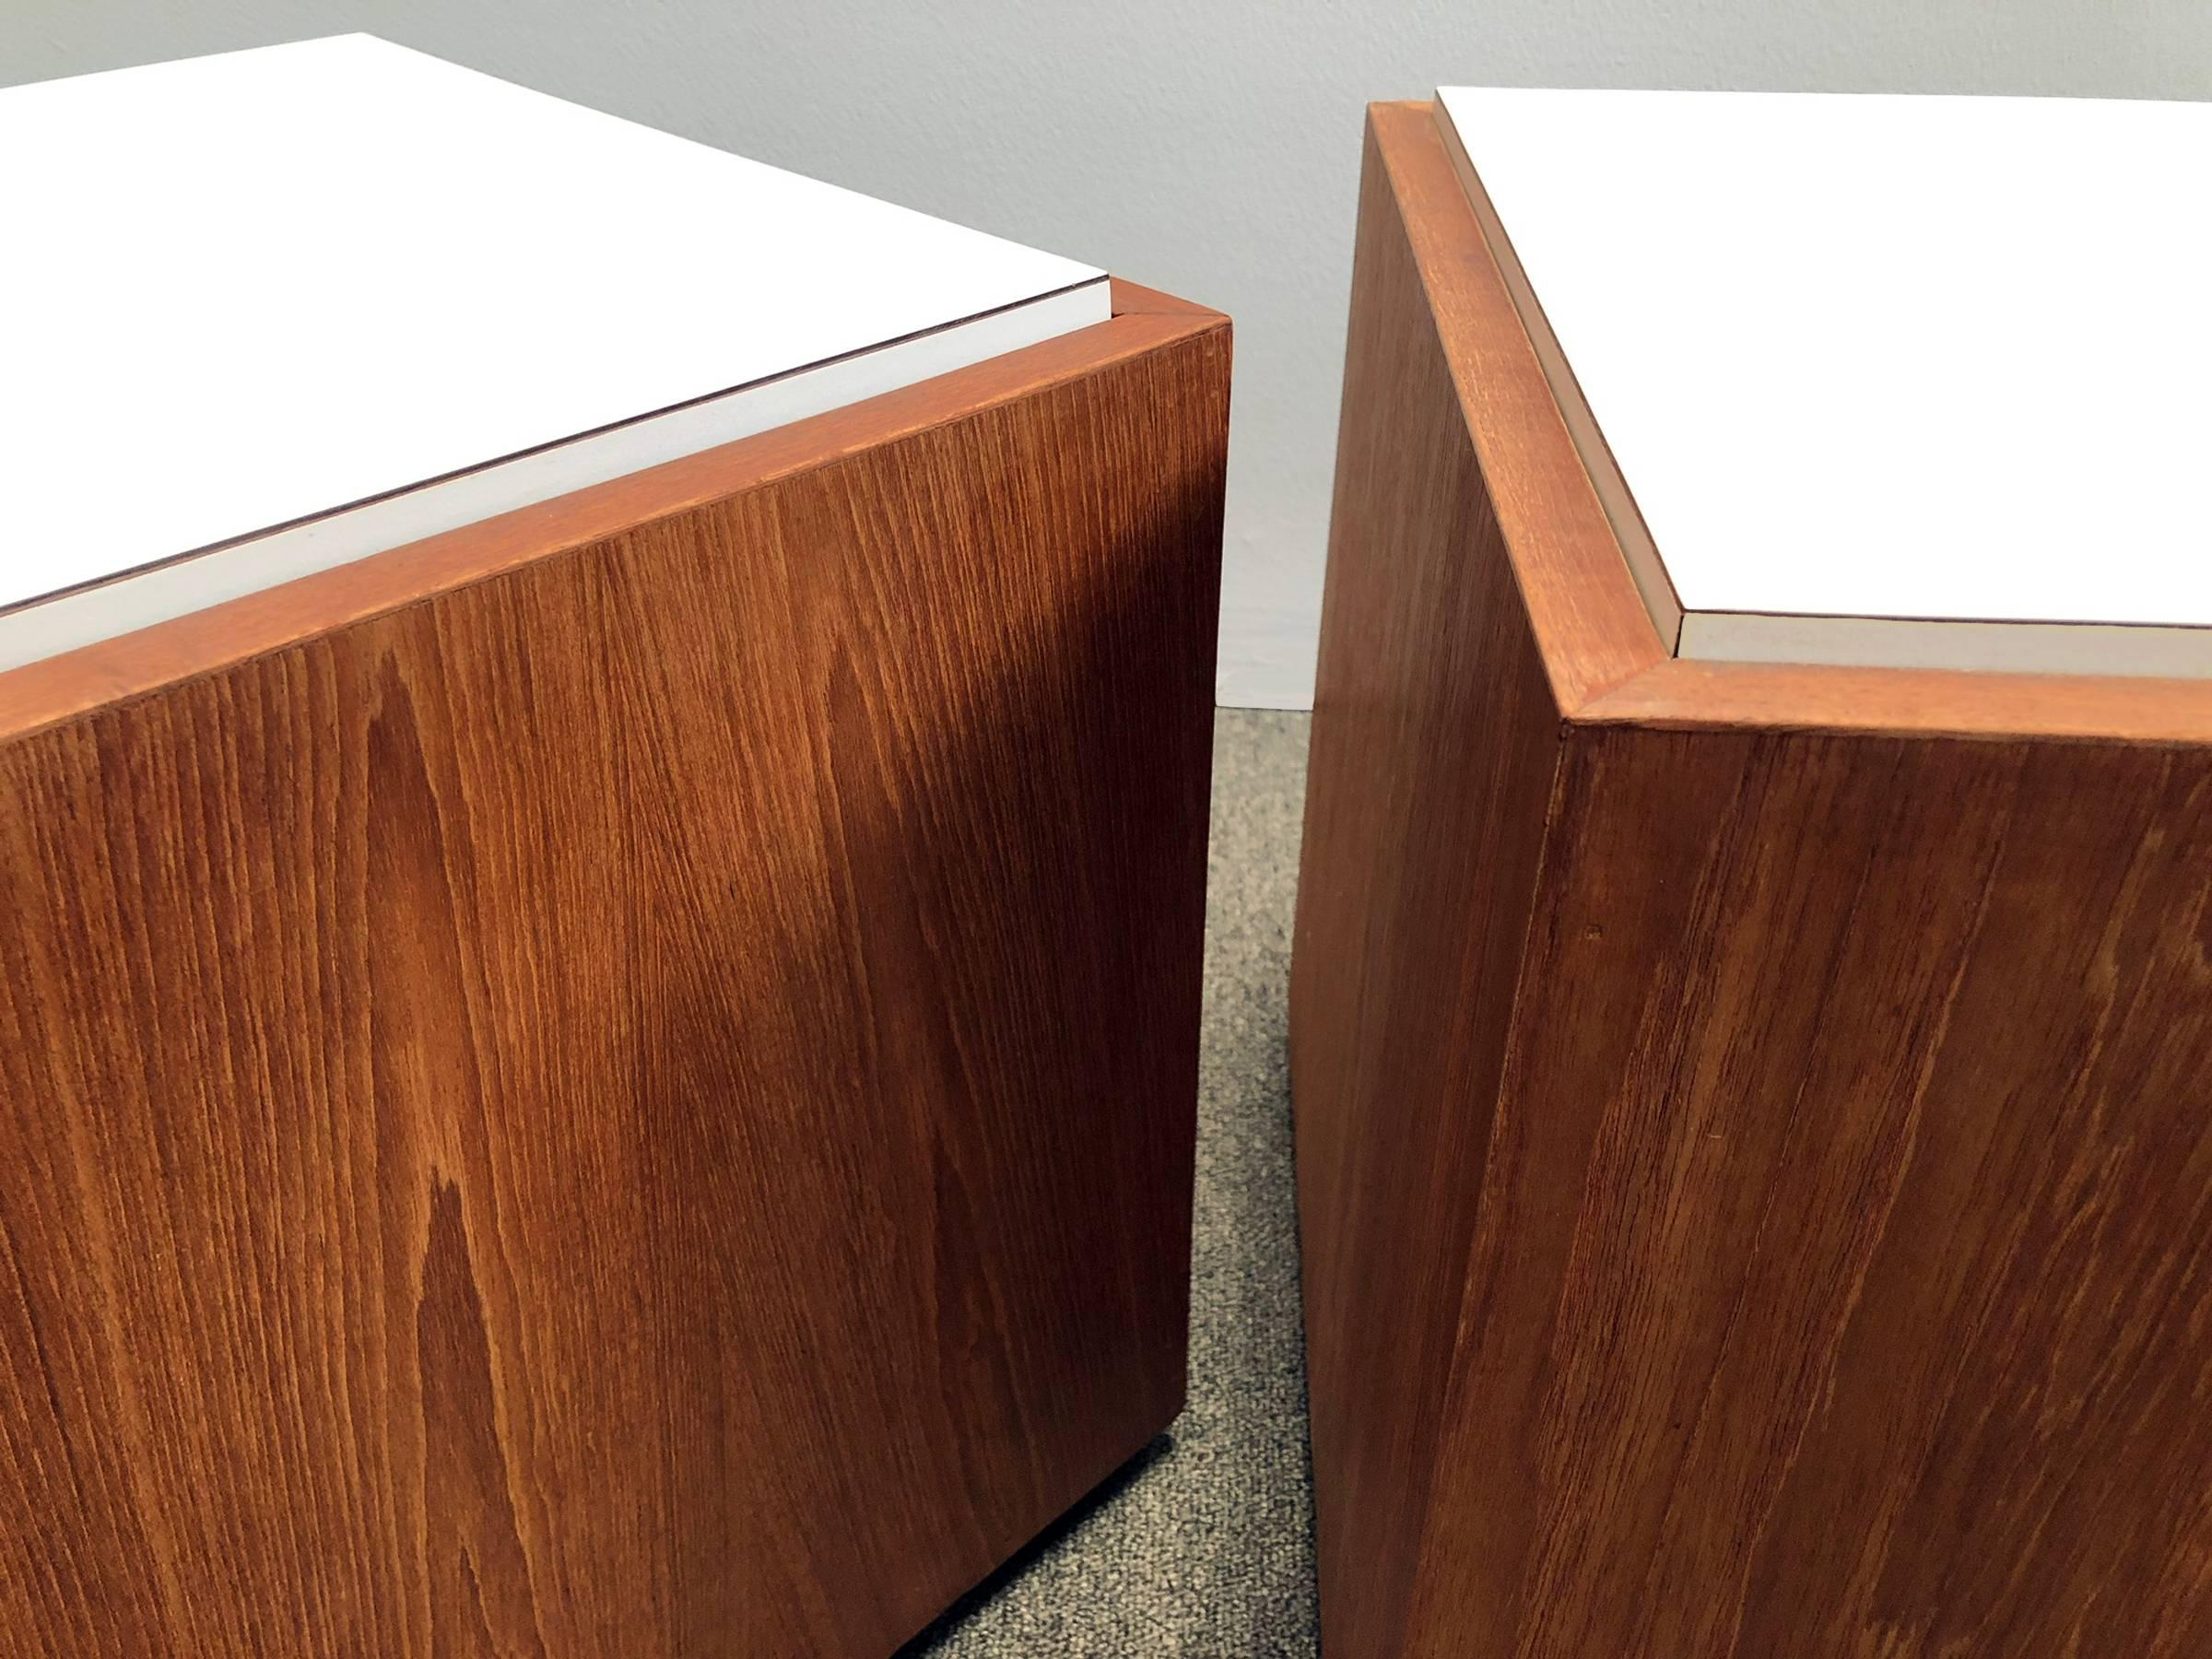 Pair of teak and Formica cube tables. Features removable tops for storage. Price is for the pair.